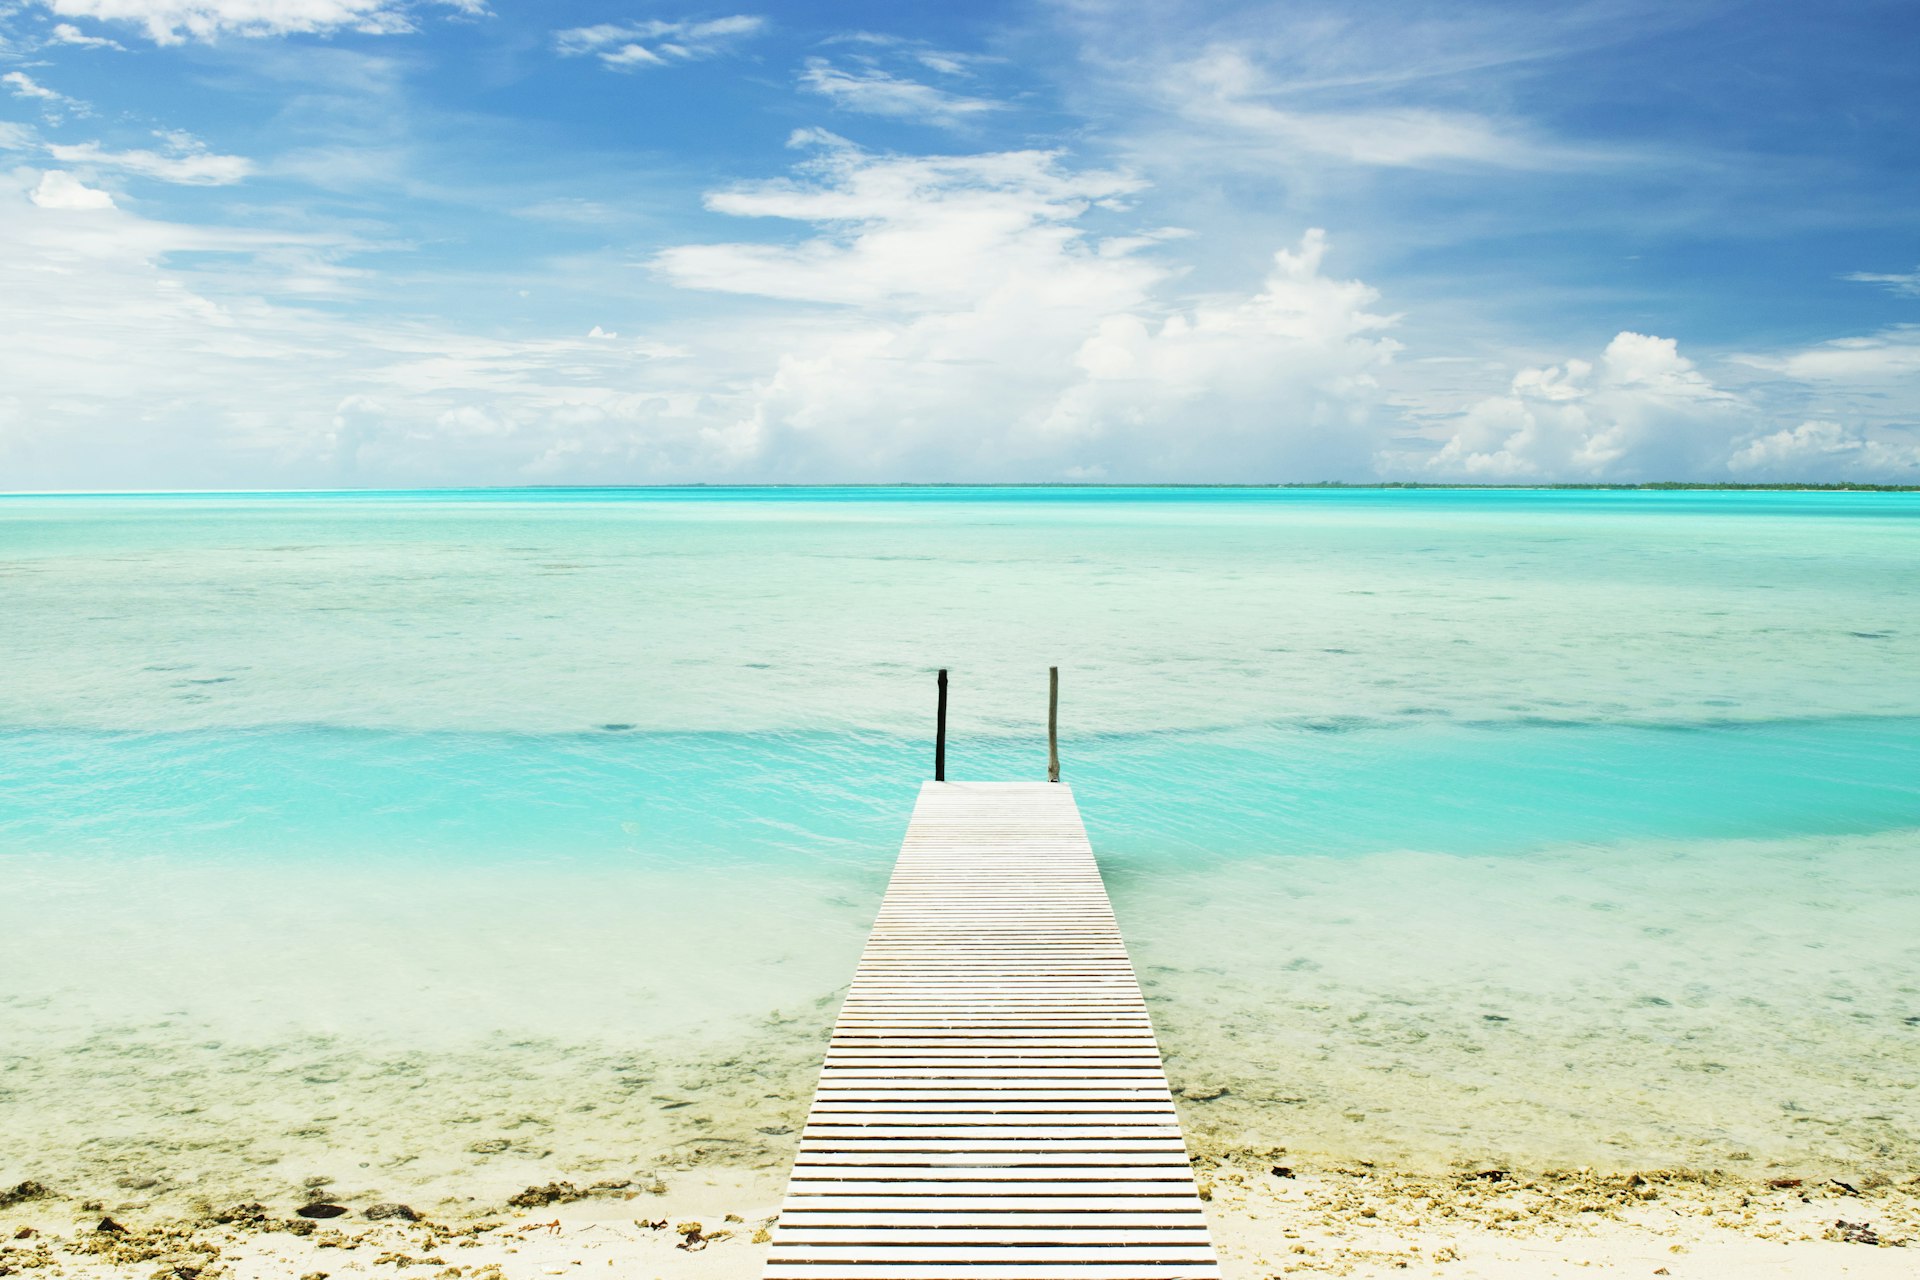 A small boardwalk jetting out over the lagoon in atoll Anaa, which is part of the Tuamotus in French Polynesia